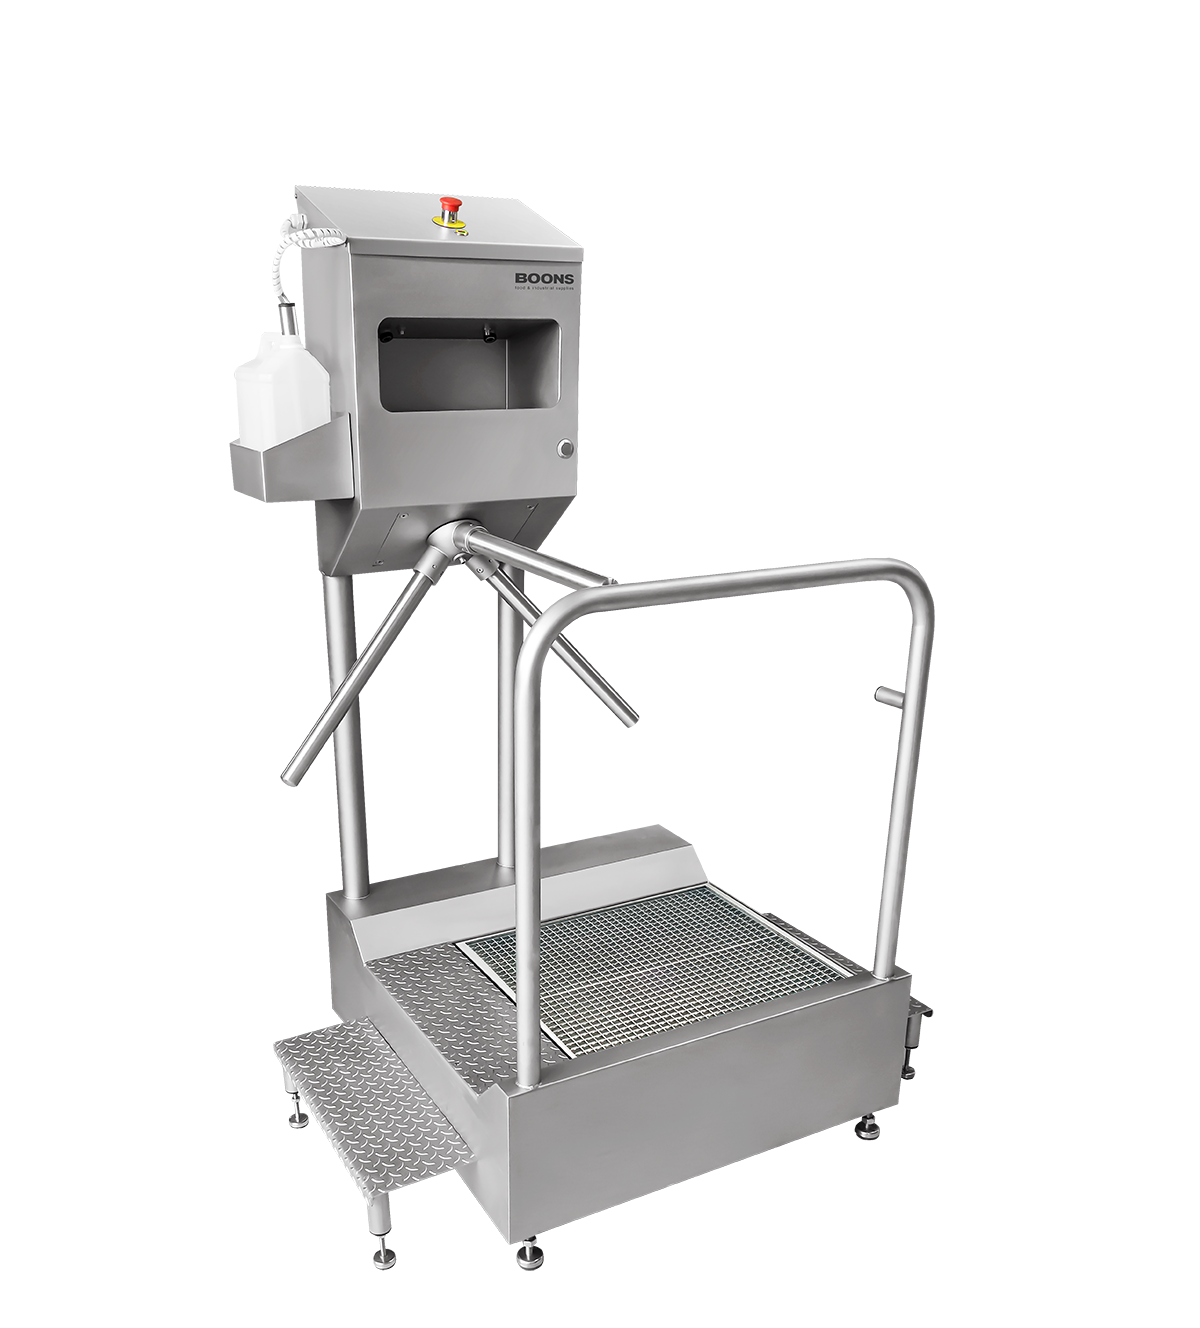 personal hygiene hand disinfection soaping unit with disinfection bath for footwear Cleansy HSD hygiene station BoonsFIS